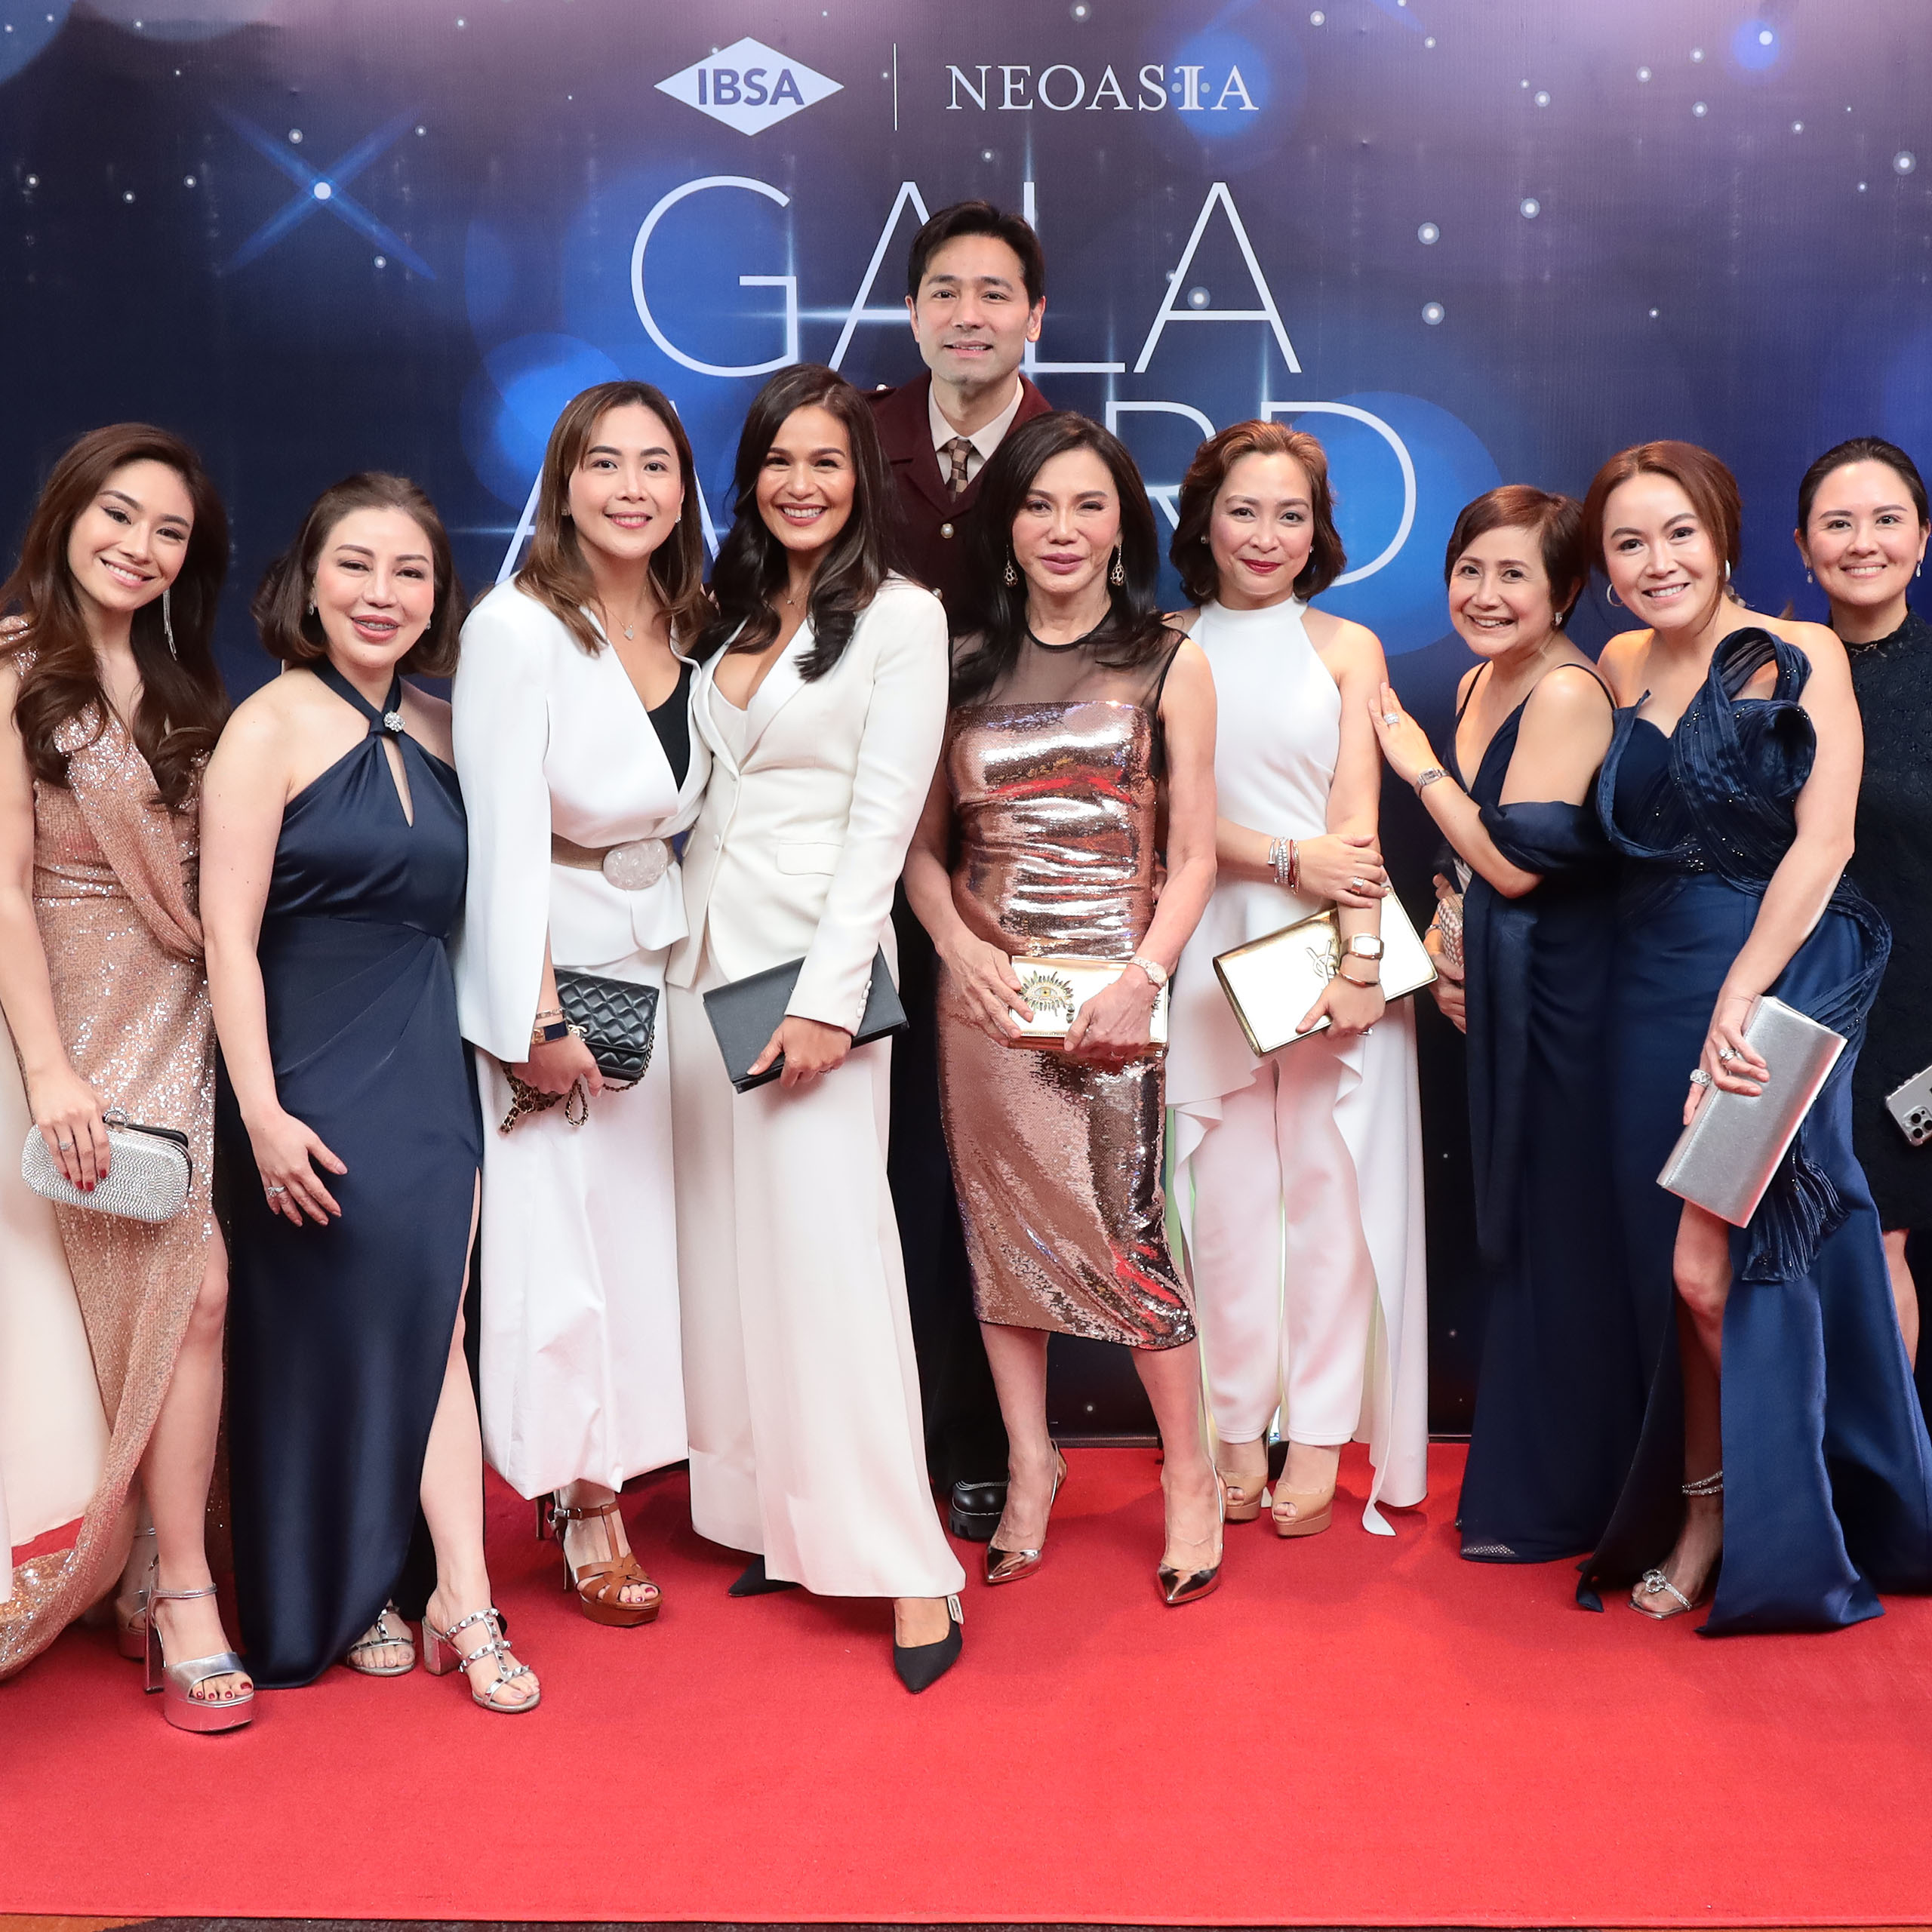 Belo Medical Group Achieves #1 Award for Leading Profhilo Excellence in the Philippines